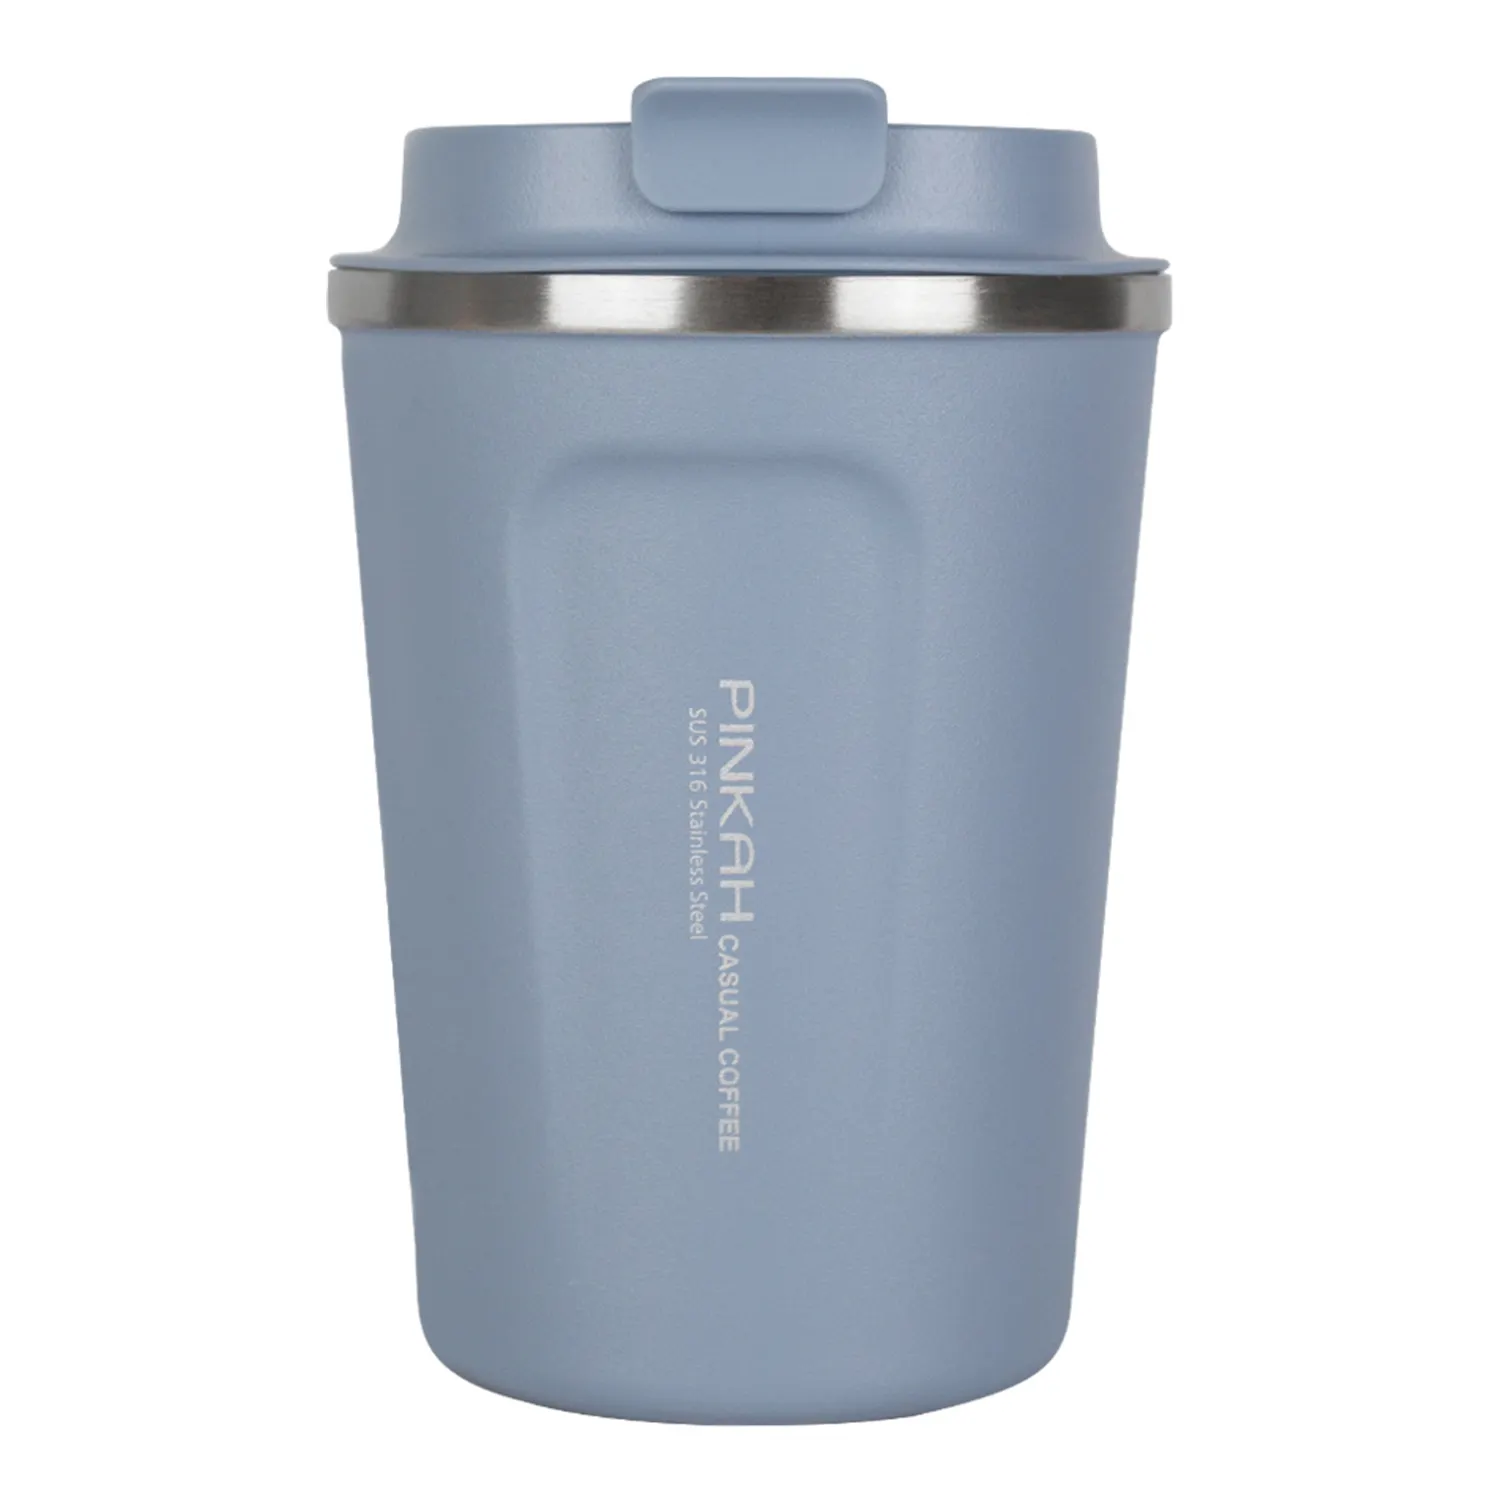 PINKAH hot selling 350ml 12oz eco reusable leakproof 316 stainless steel insulated vacuum coffee cup for travel mug on the go